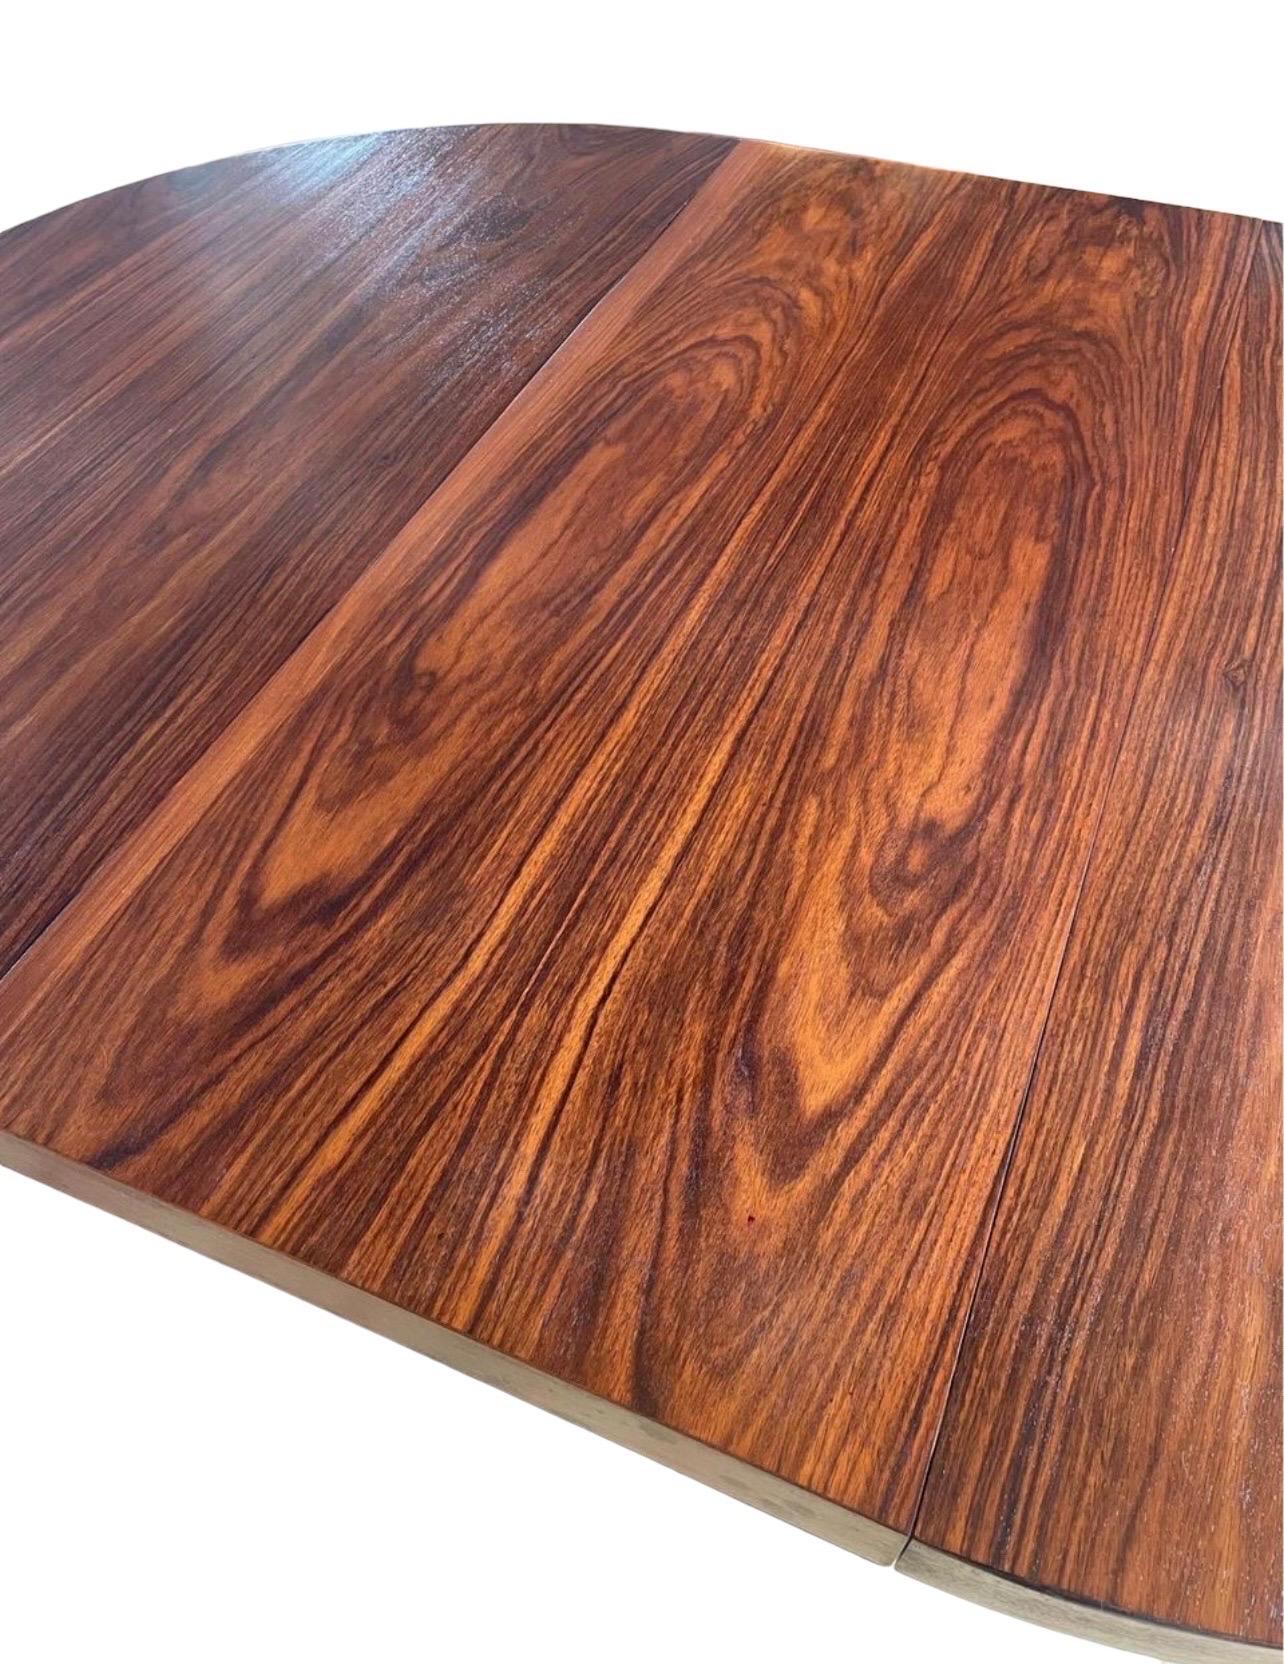 Vintage Danish Mid Century Modern Rosewood Dining Table Extendable with one leaf For Sale 3